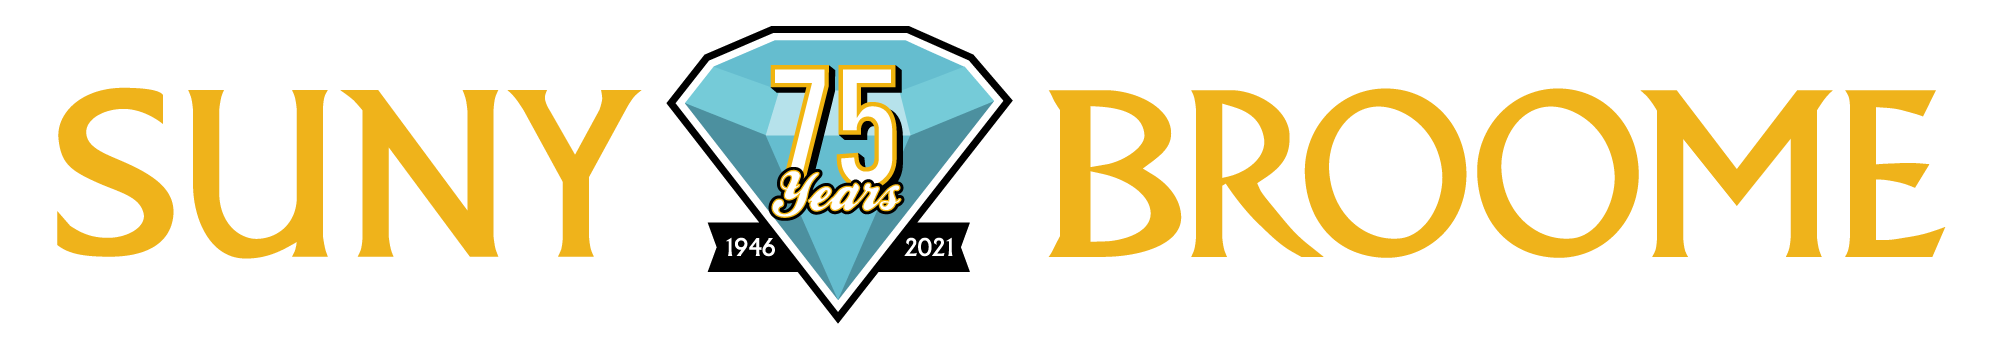 75 anniversary logo without the tagline